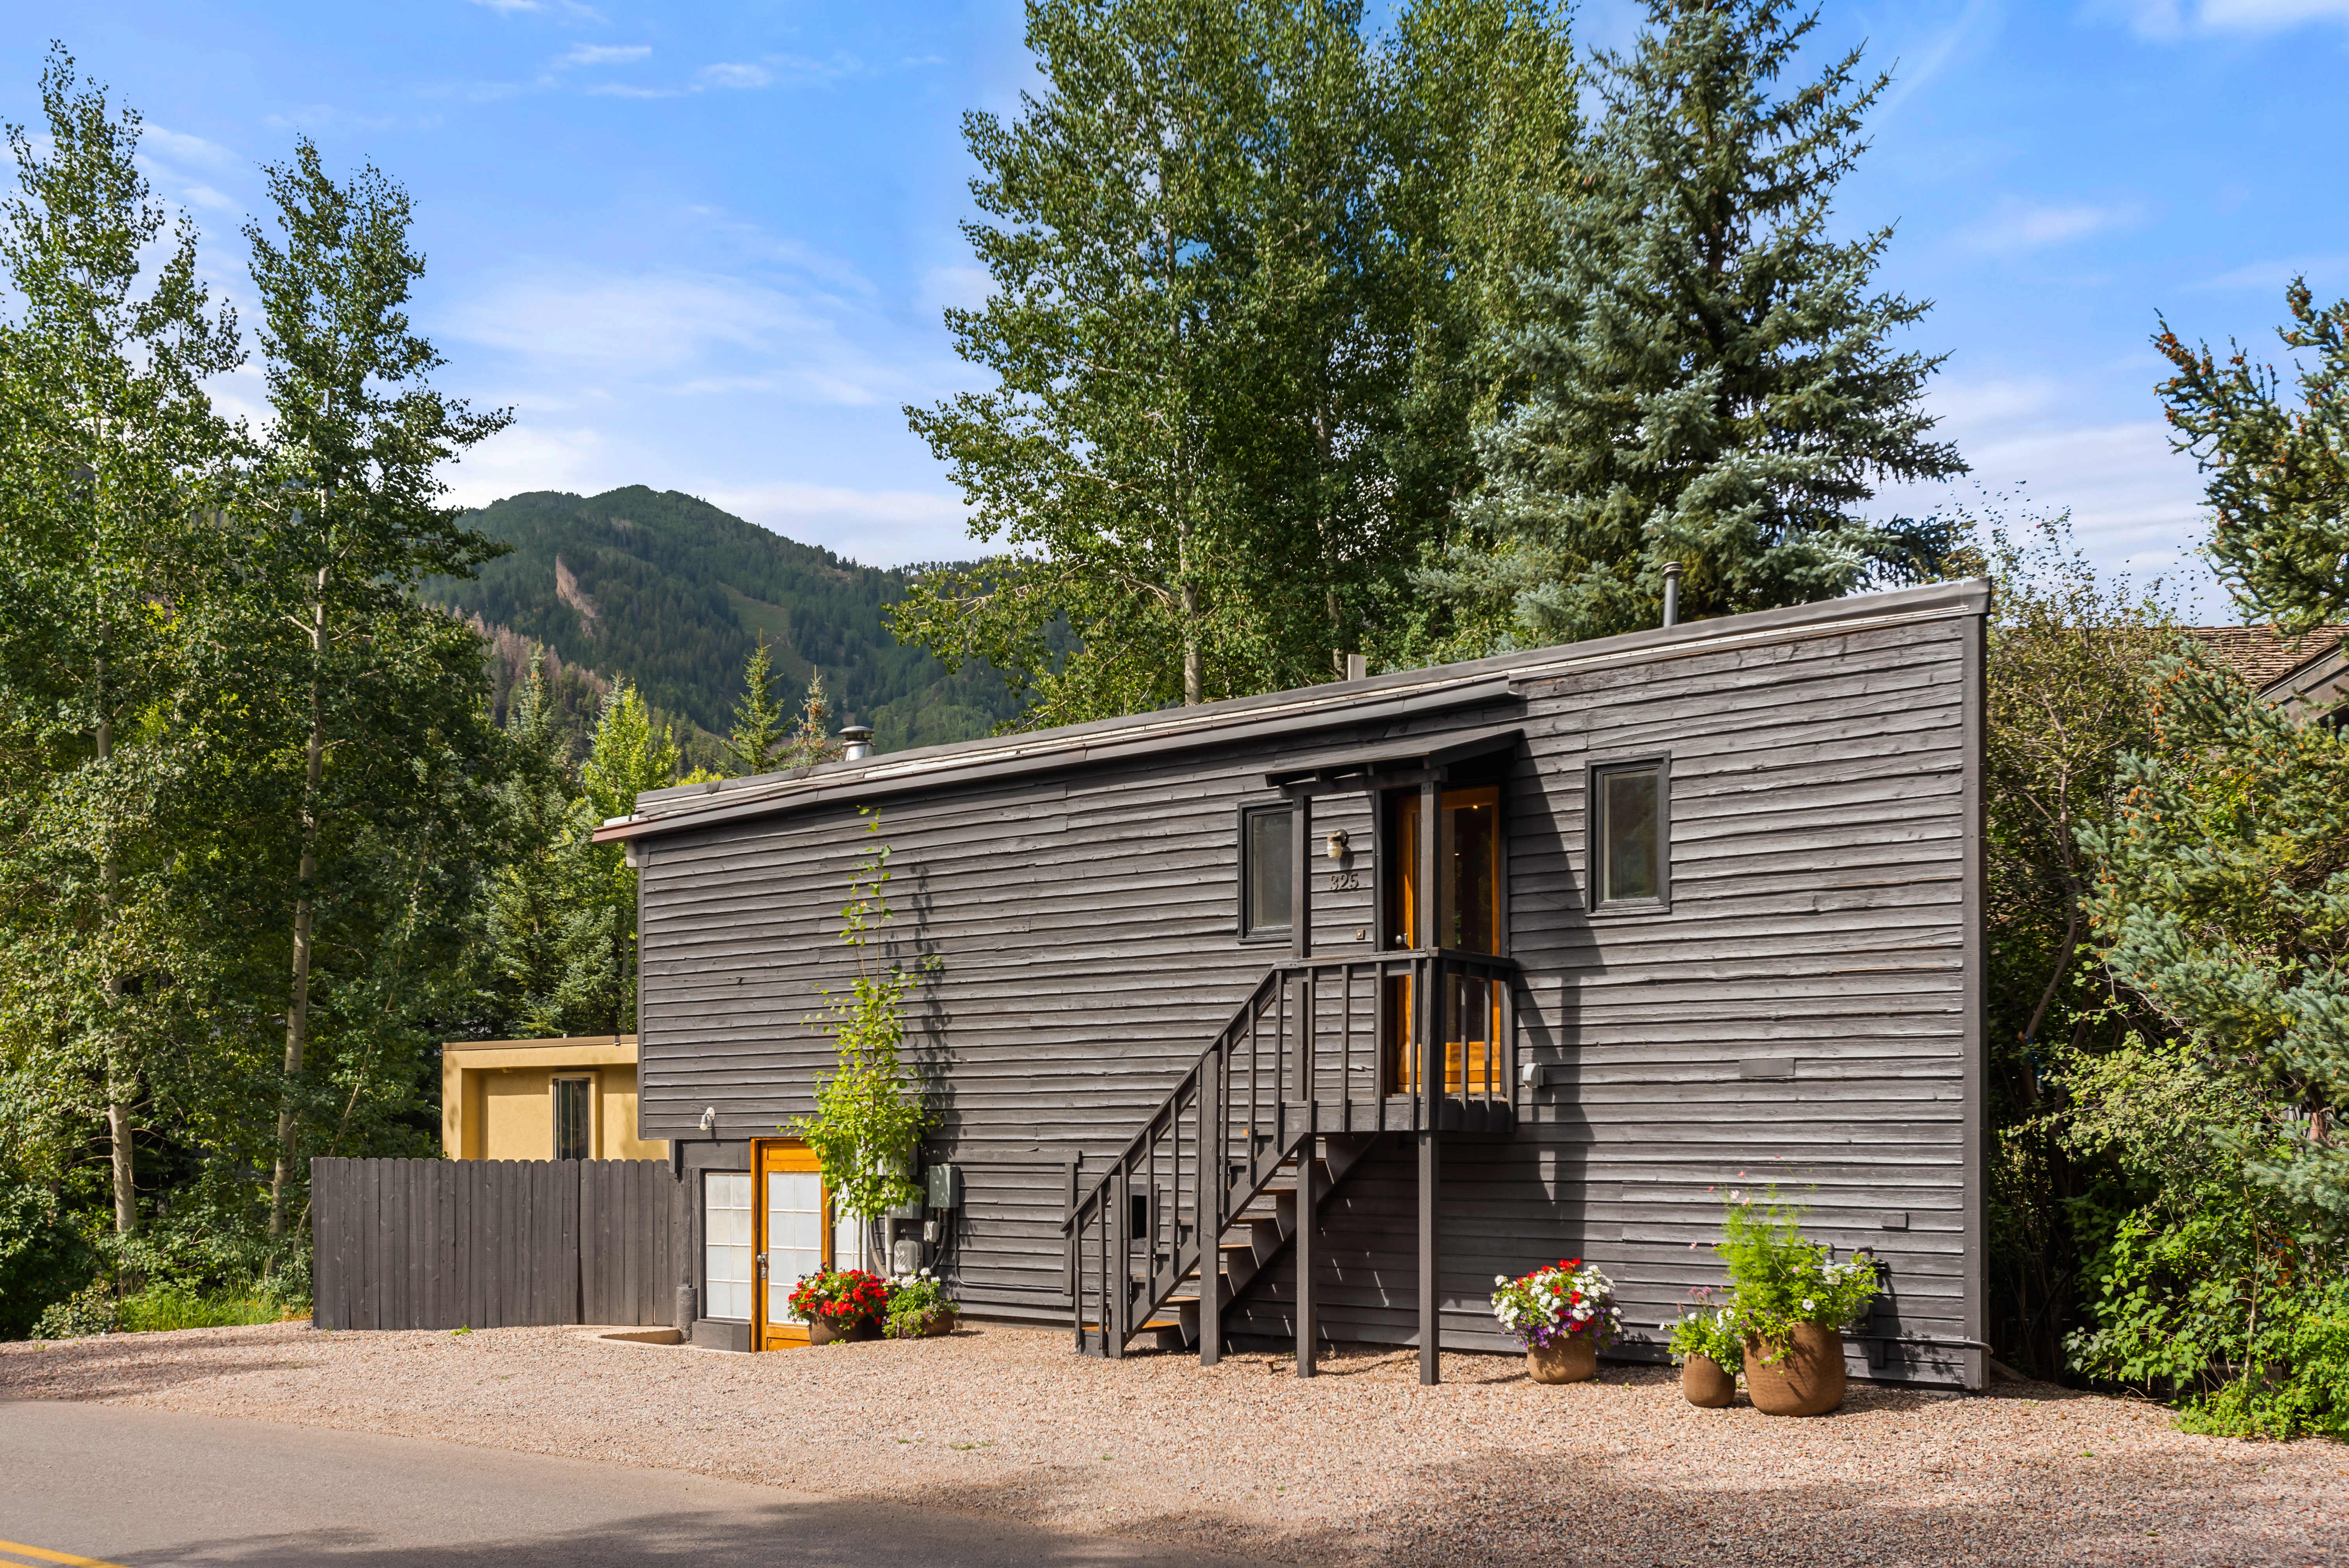 Park Ave Charm - Lovely single-family home with views of Aspen Mountain